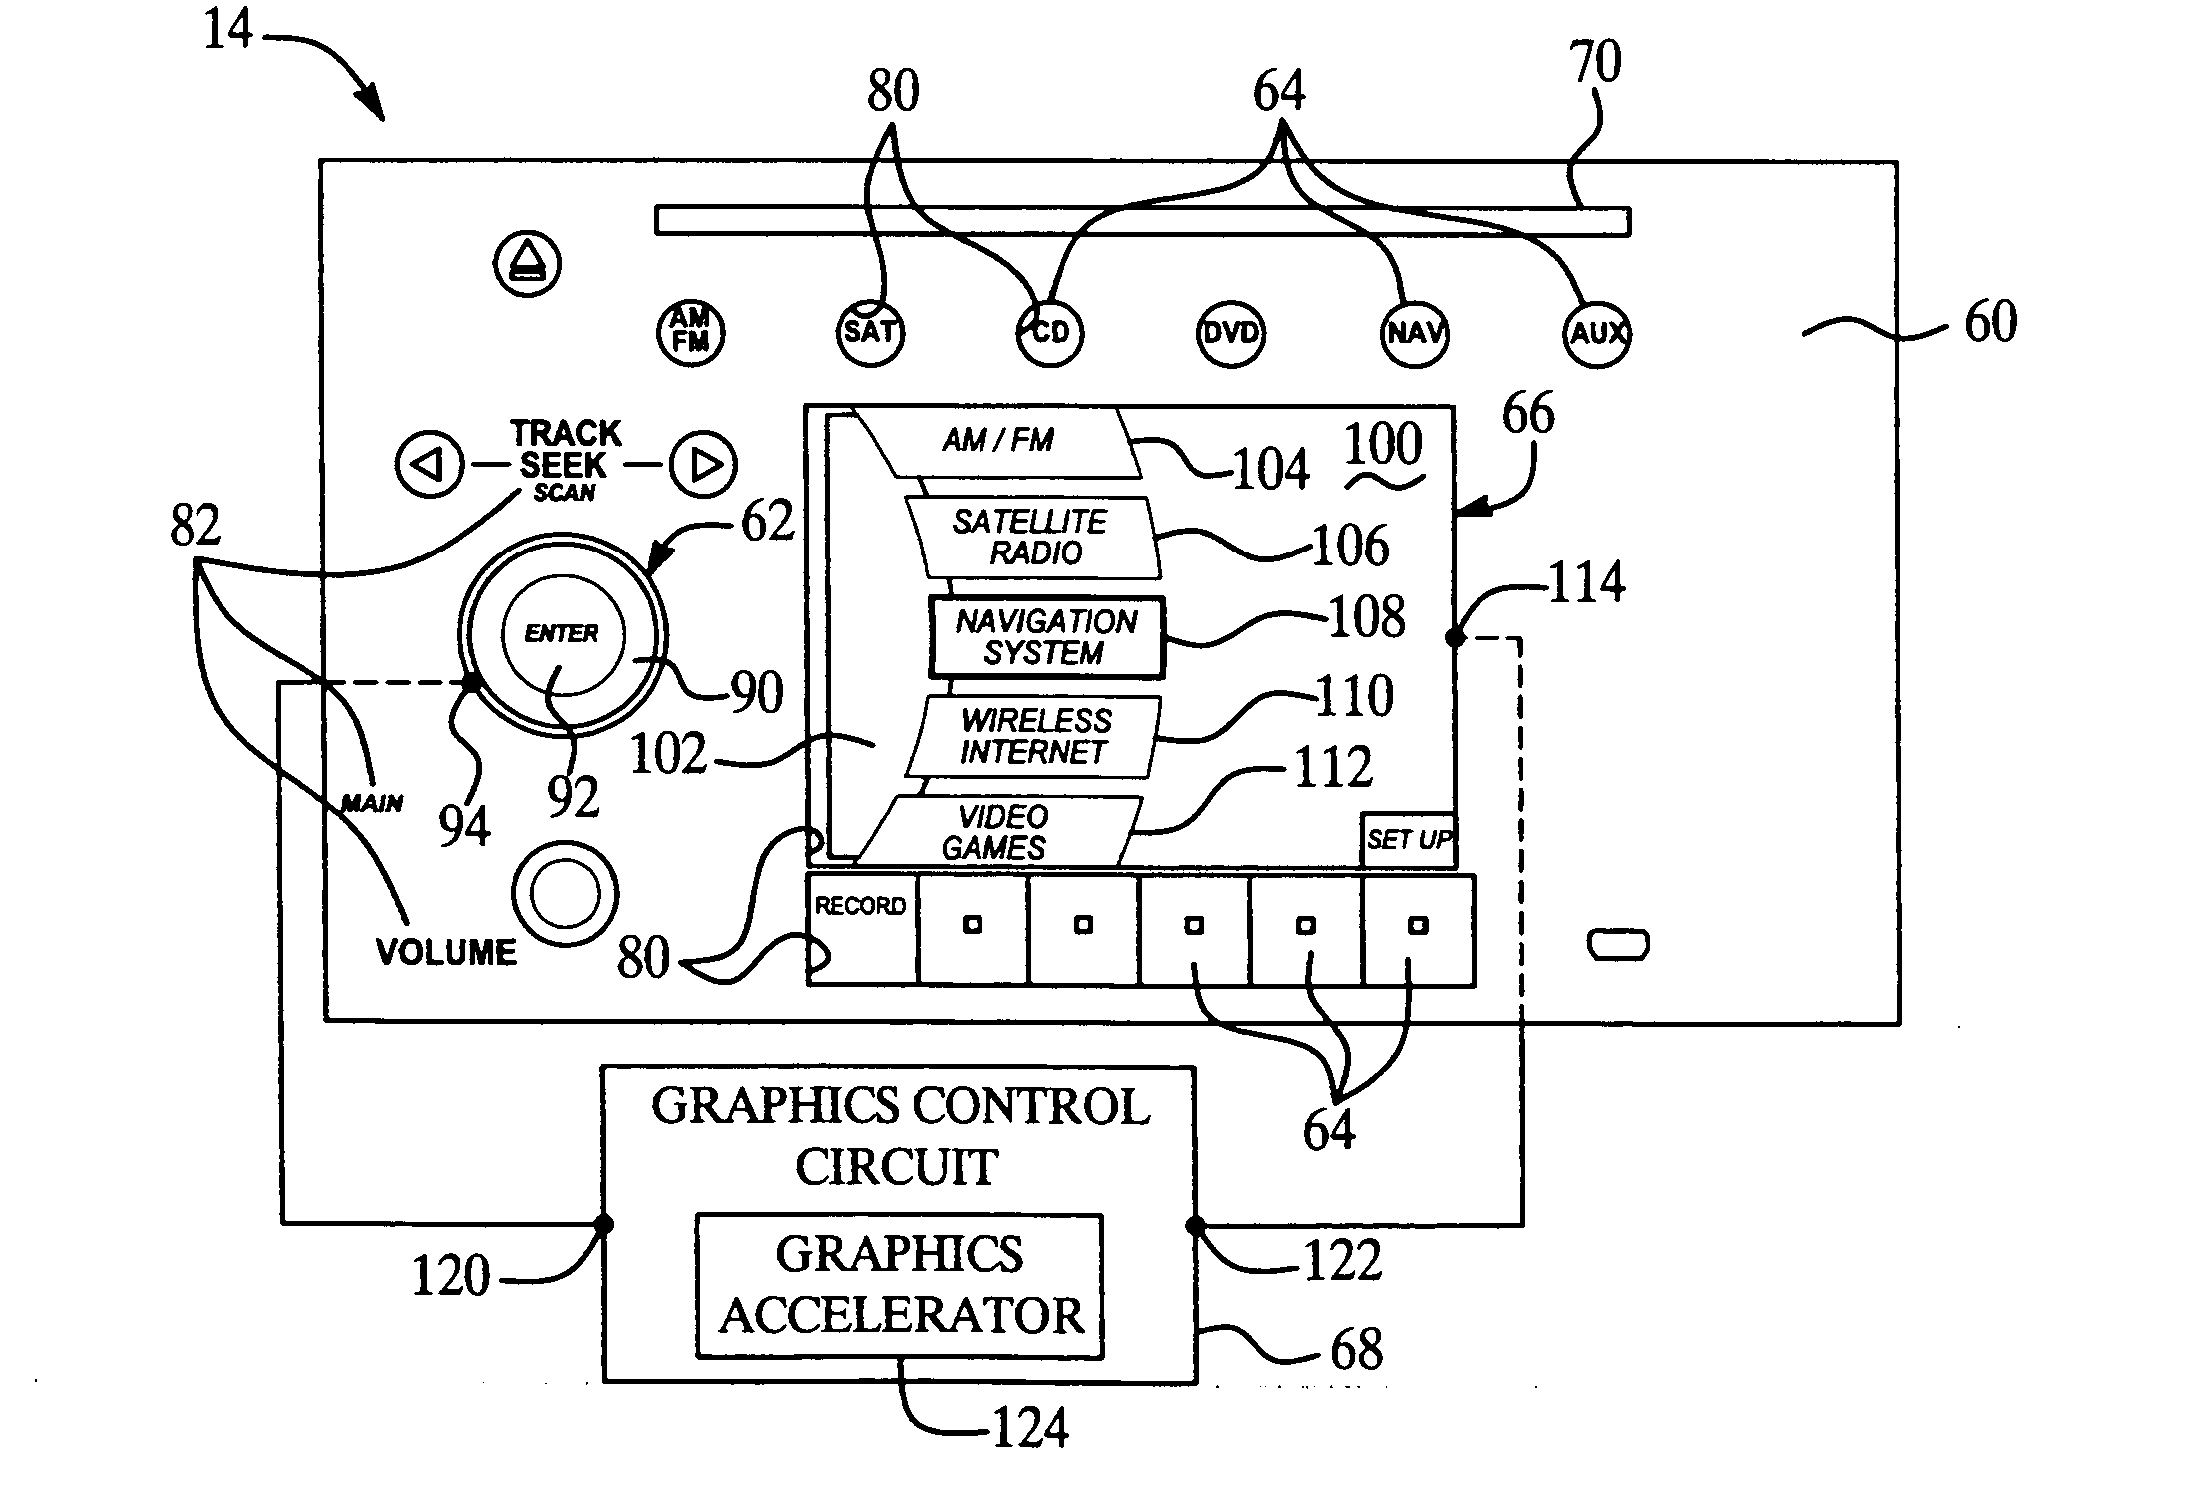 Graphical user interface for use with a multi-media system